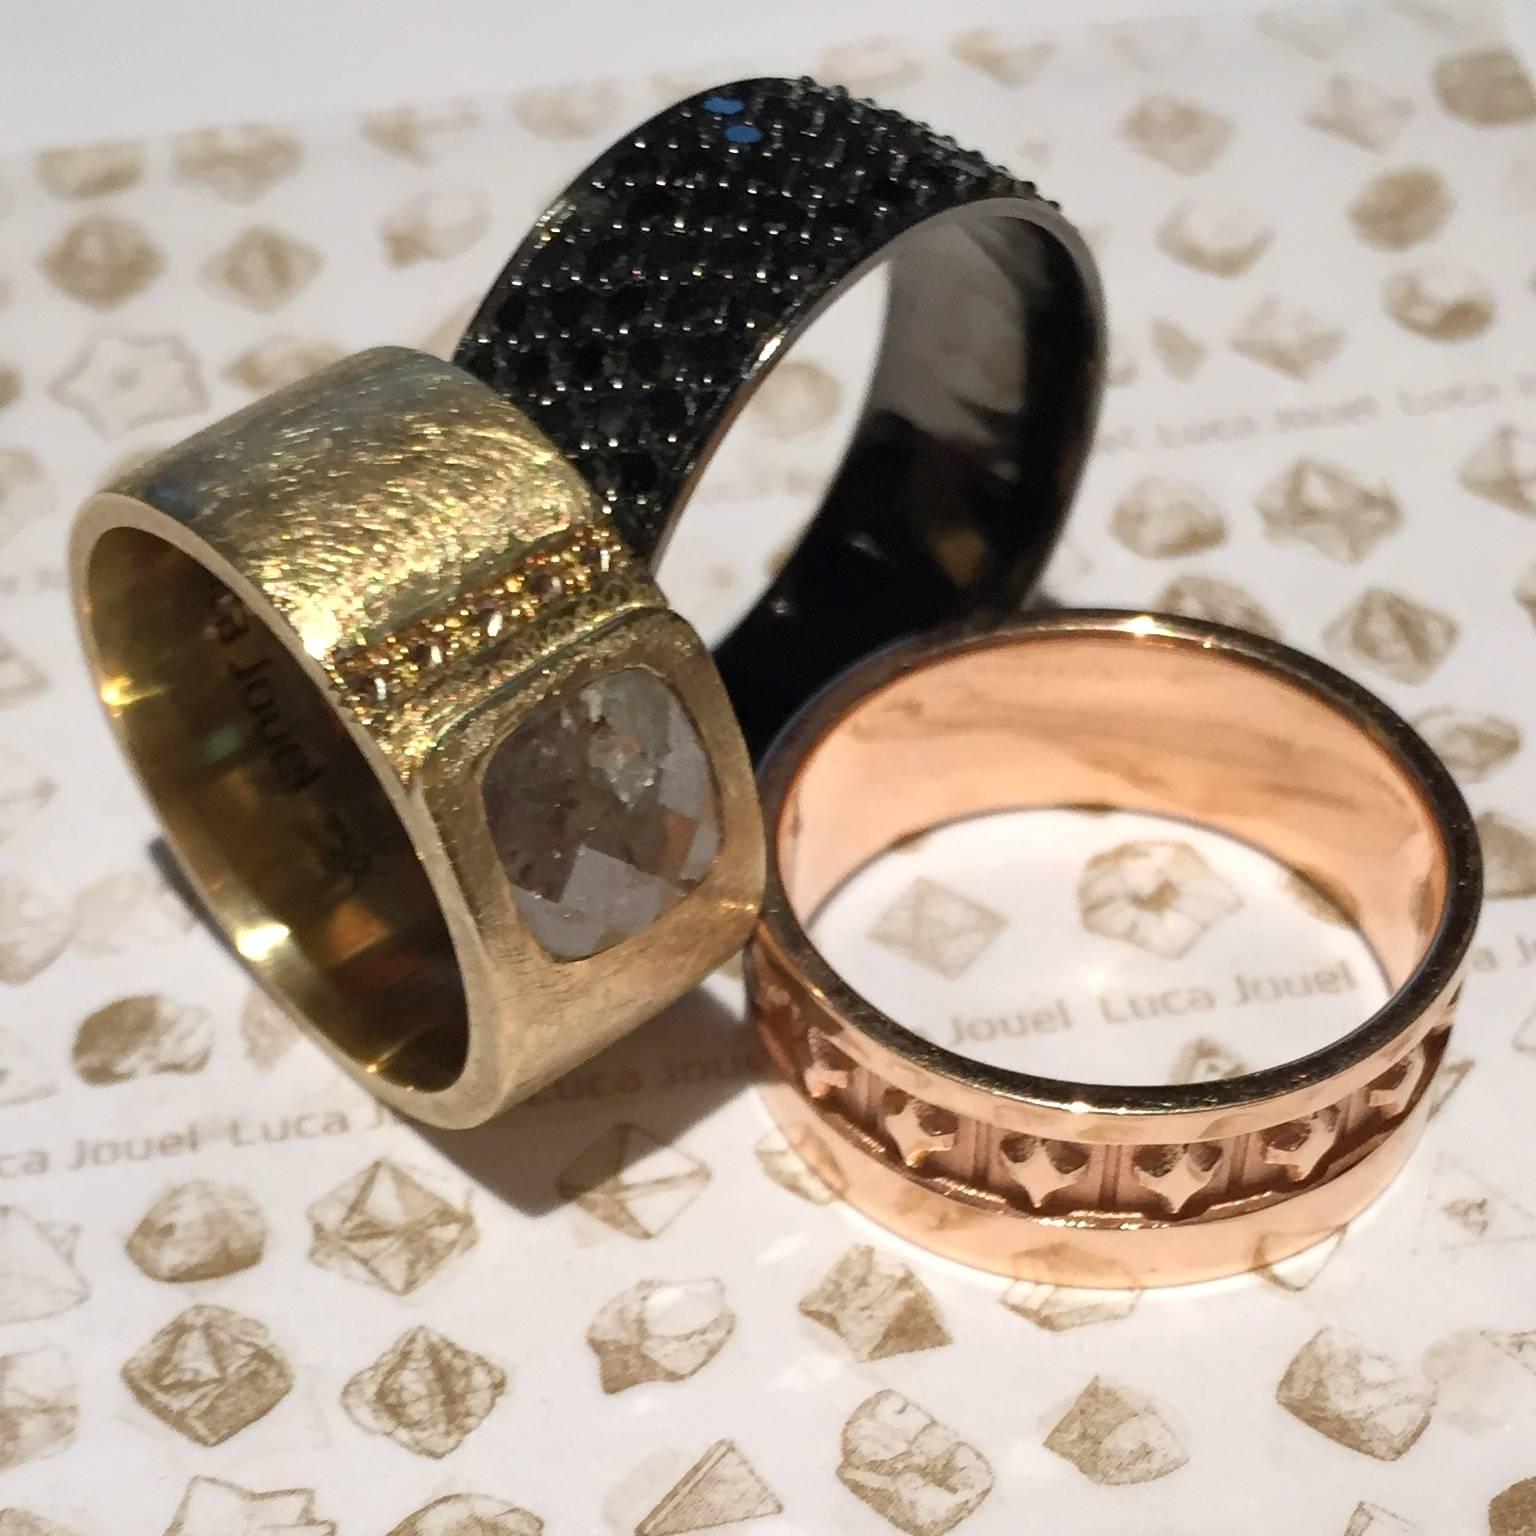 Contemporary Luca Jouel Black Diamond Gents Band and Decorative Cufflinks